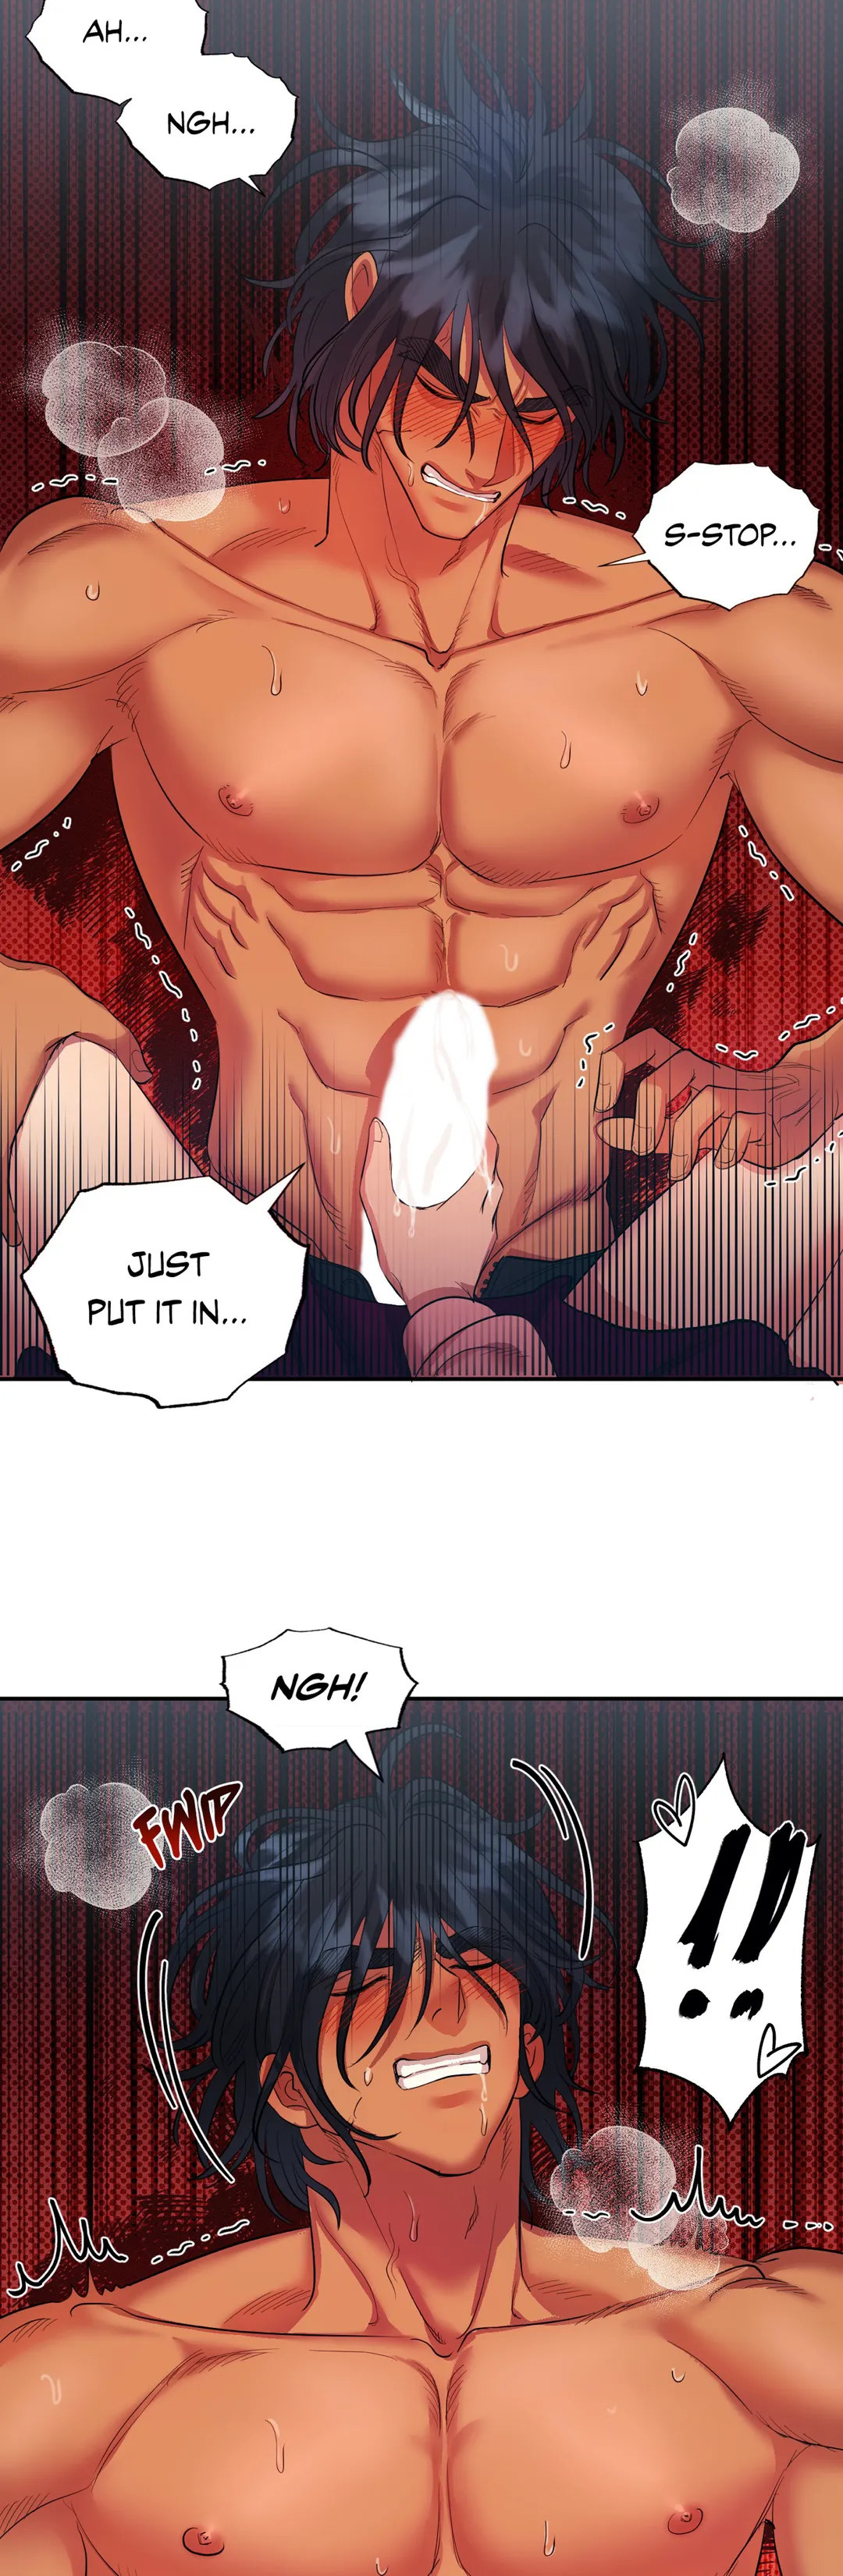 Hana’s Demons of Lust Chapter 11 - Page 26